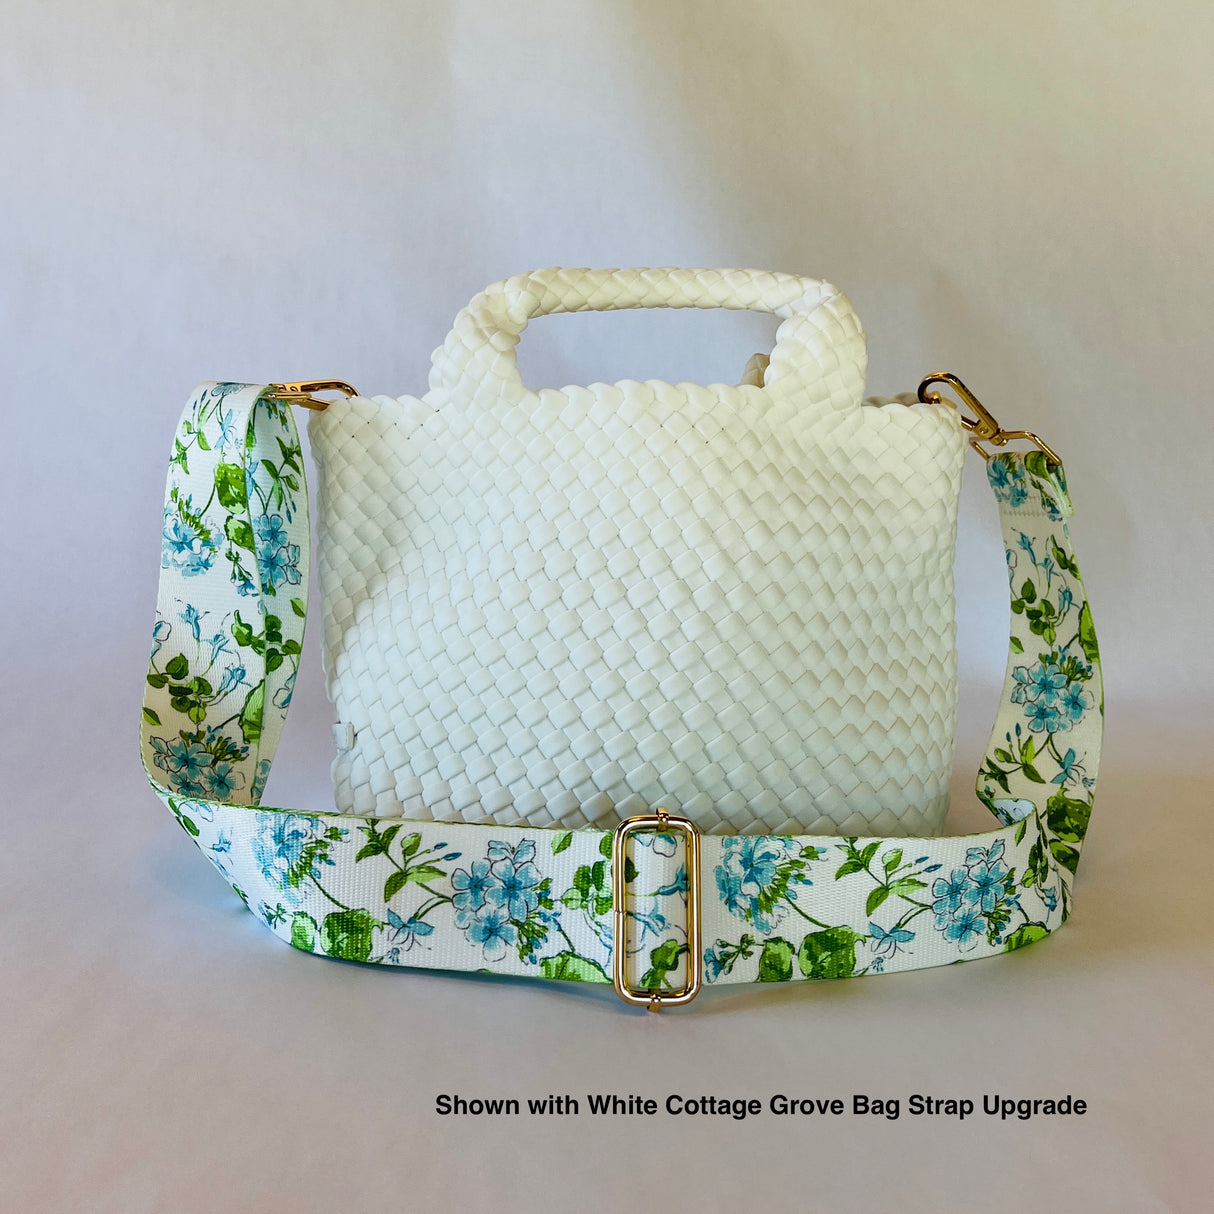 Woven Neoprene White Tote With Matching Solid Crossbody Strap